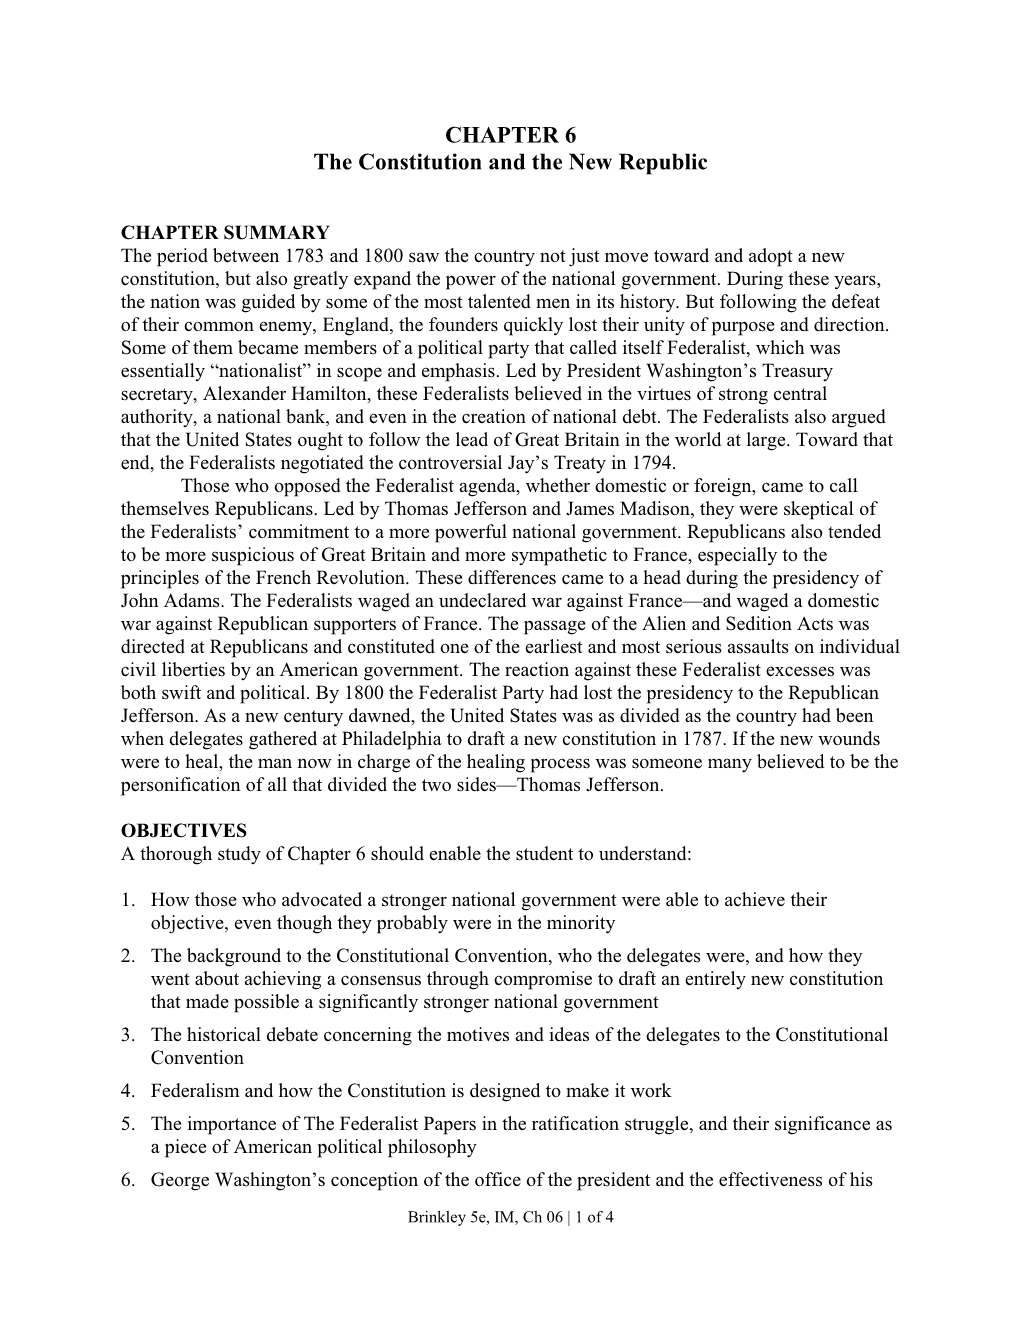 The Constitution and the New Republic